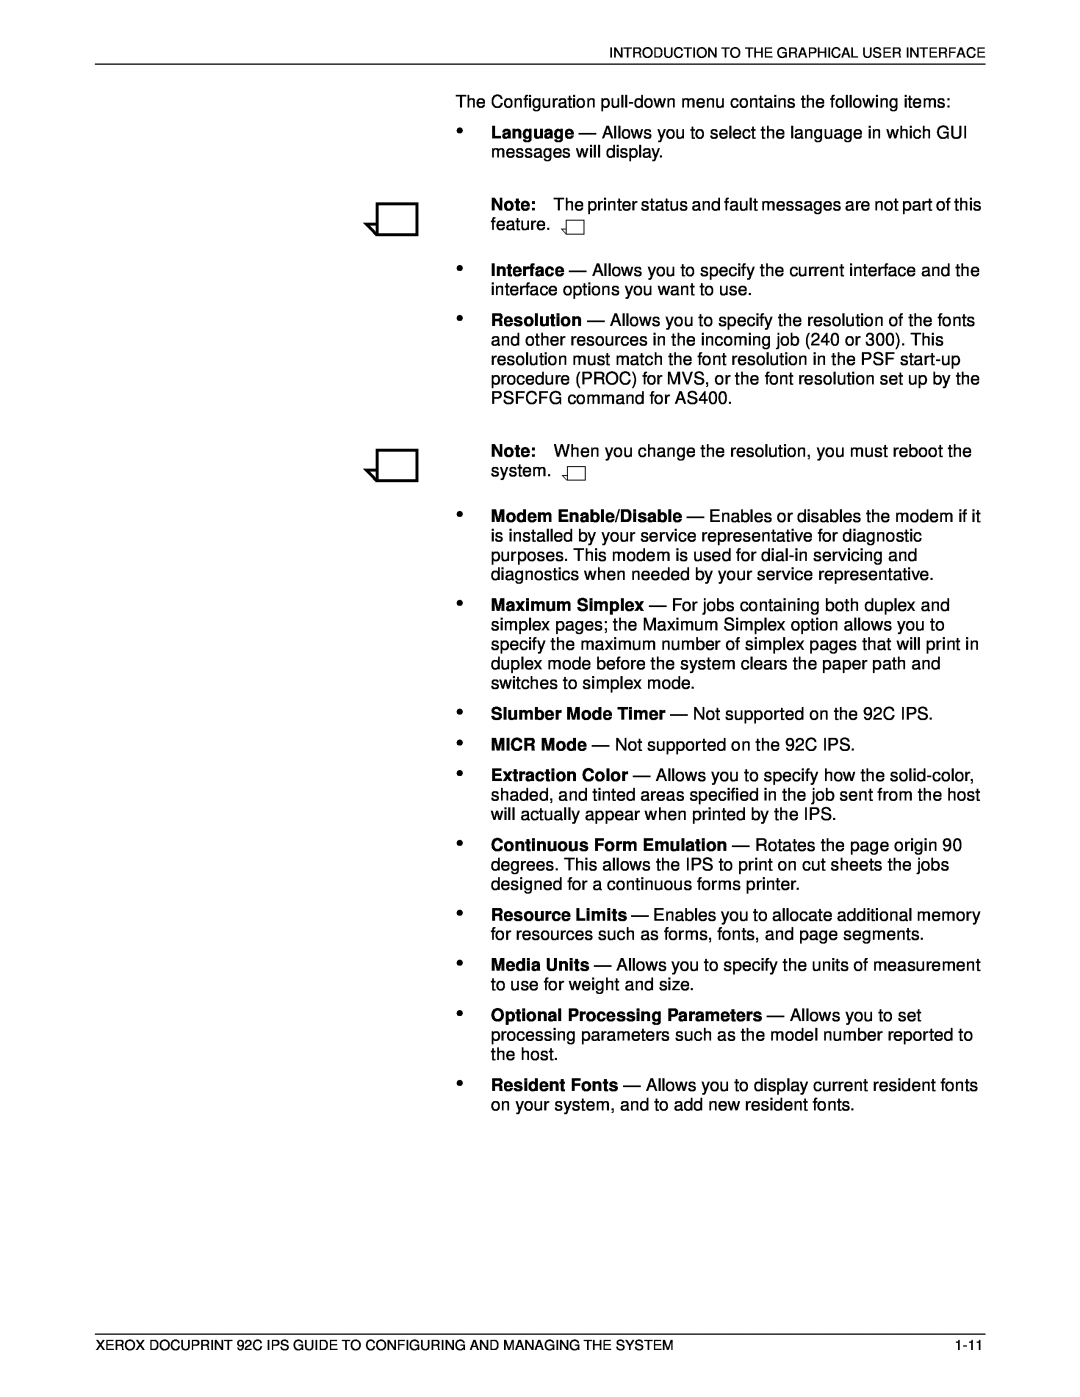 Xerox 92C IPS manual The Configuration pull-down menu contains the following items 